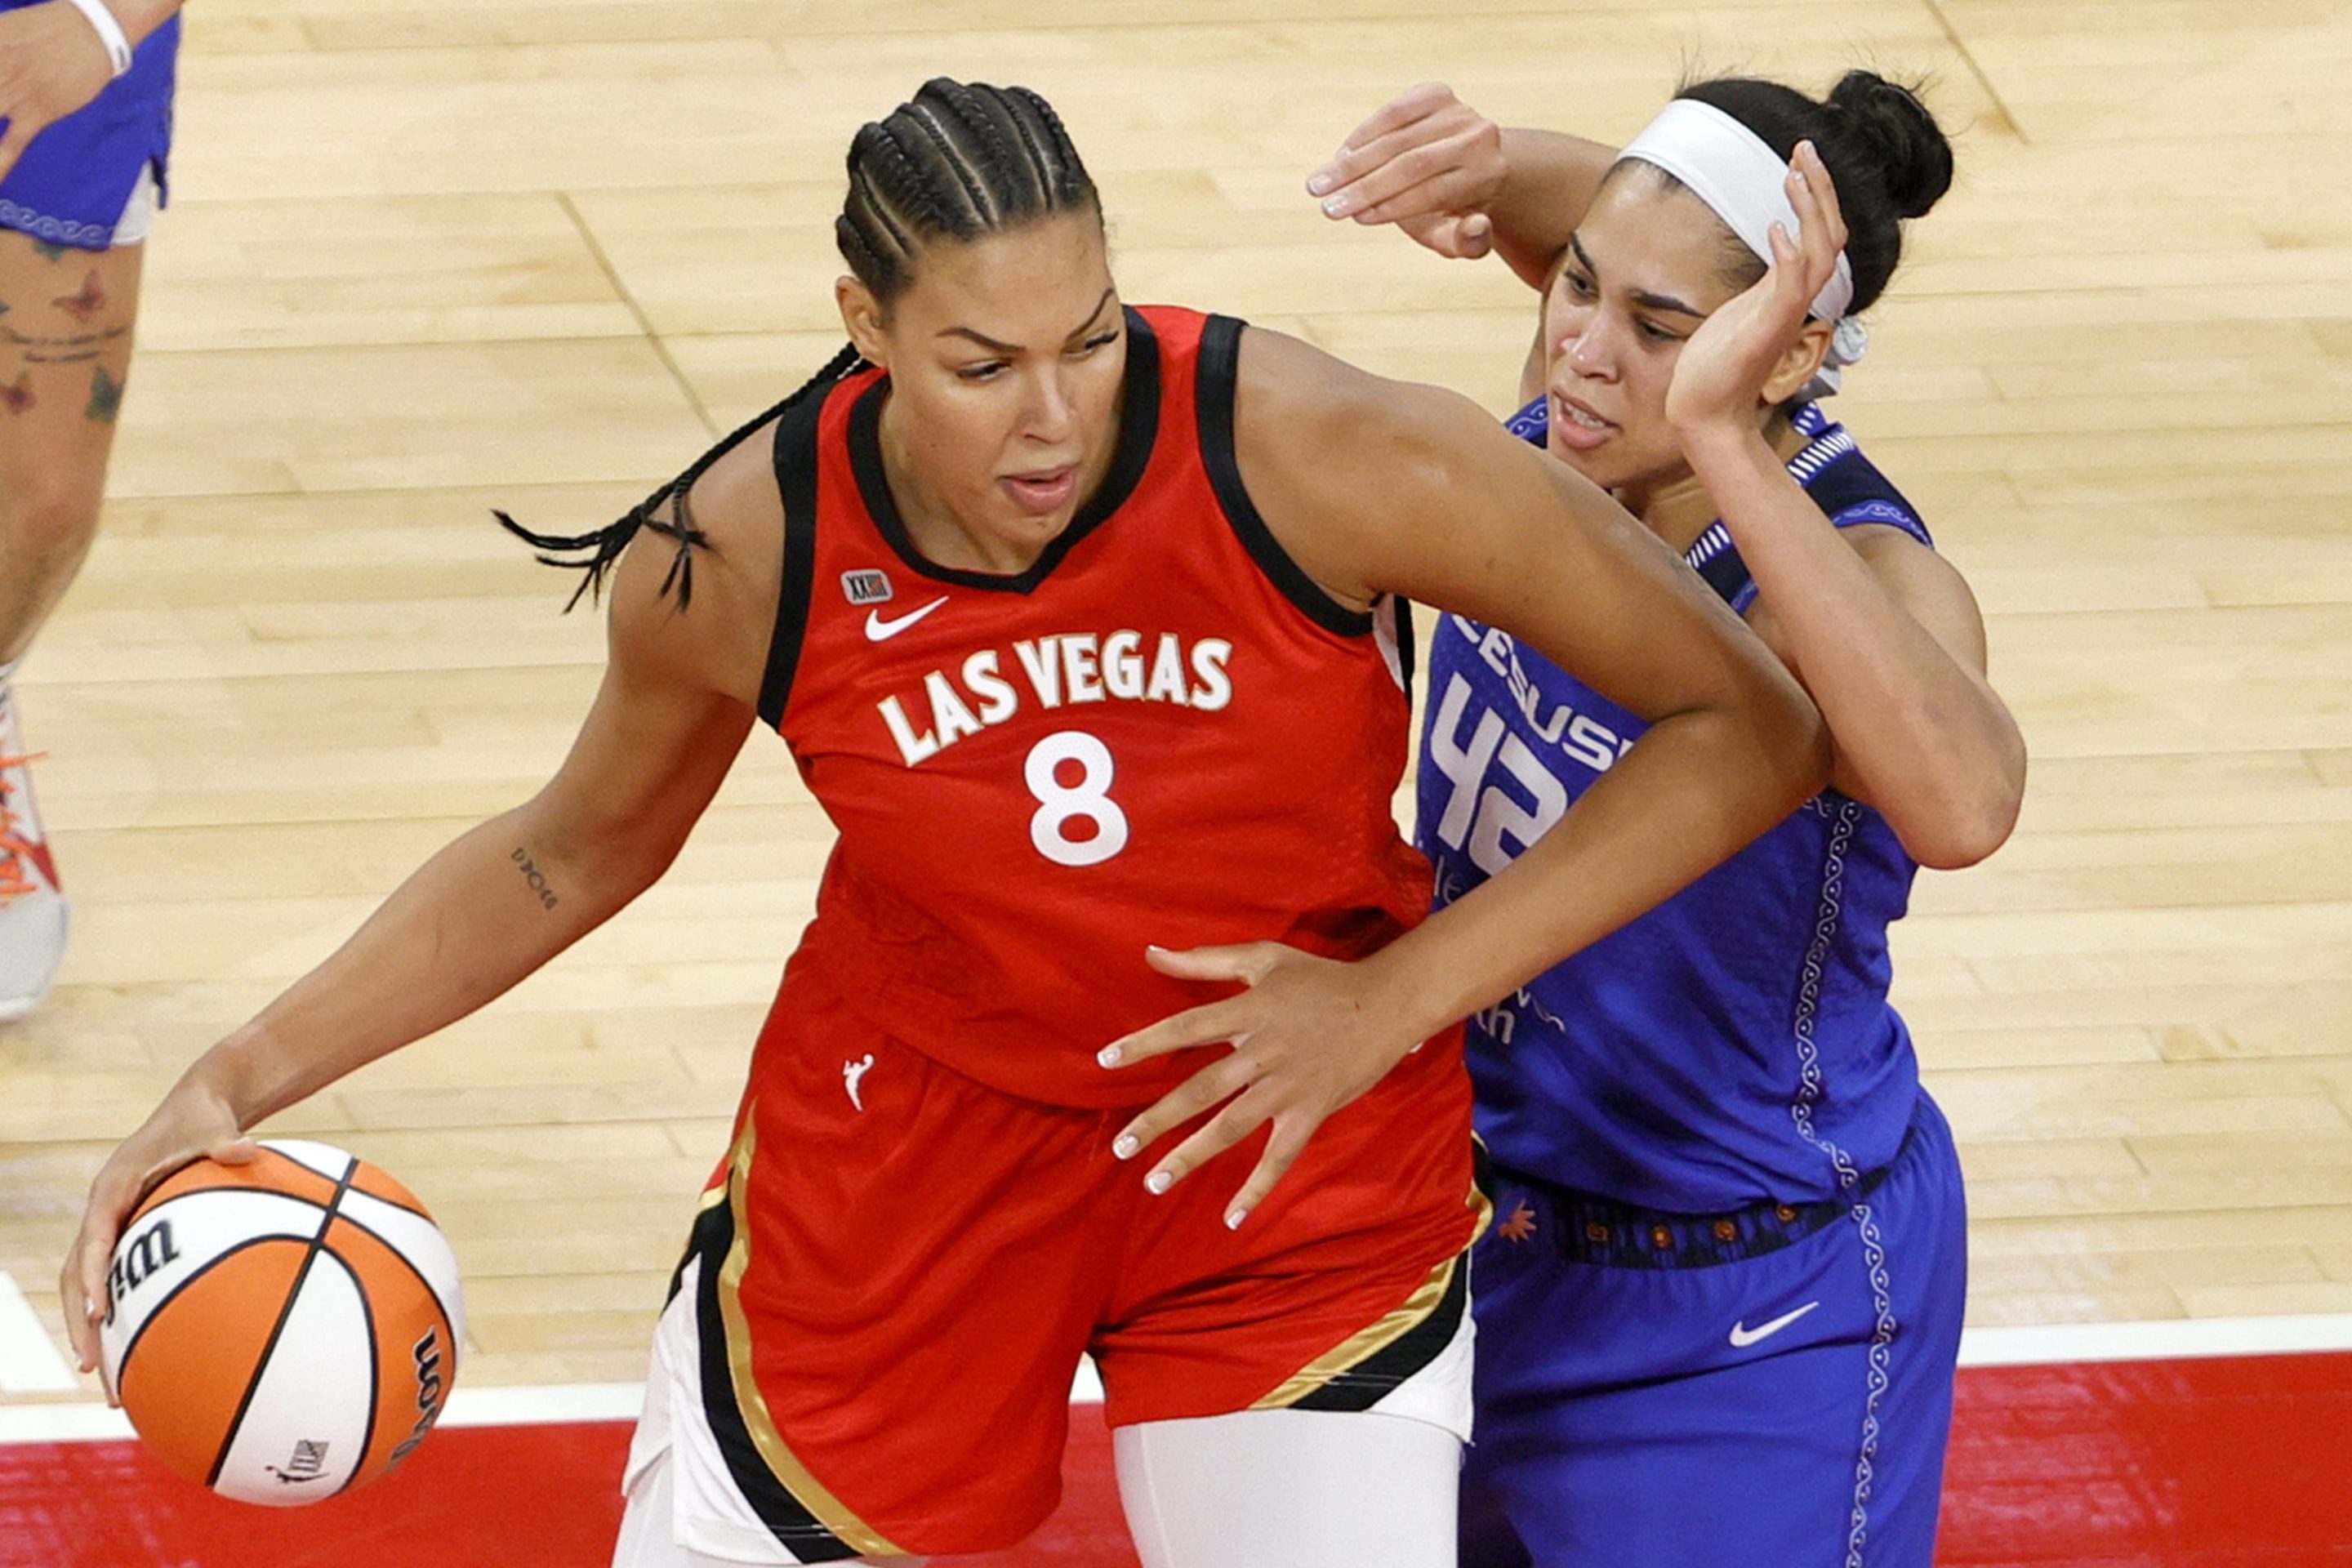 Liz Cambage #8 of the Las Vegas Aces is guarded by Brionna Jones #42 of the Connecticut Sun during their game at Michelob ULTRA Arena on May 23, 2021 in Las Vegas, Nevada. The Sun defeated the Aces 72-65.